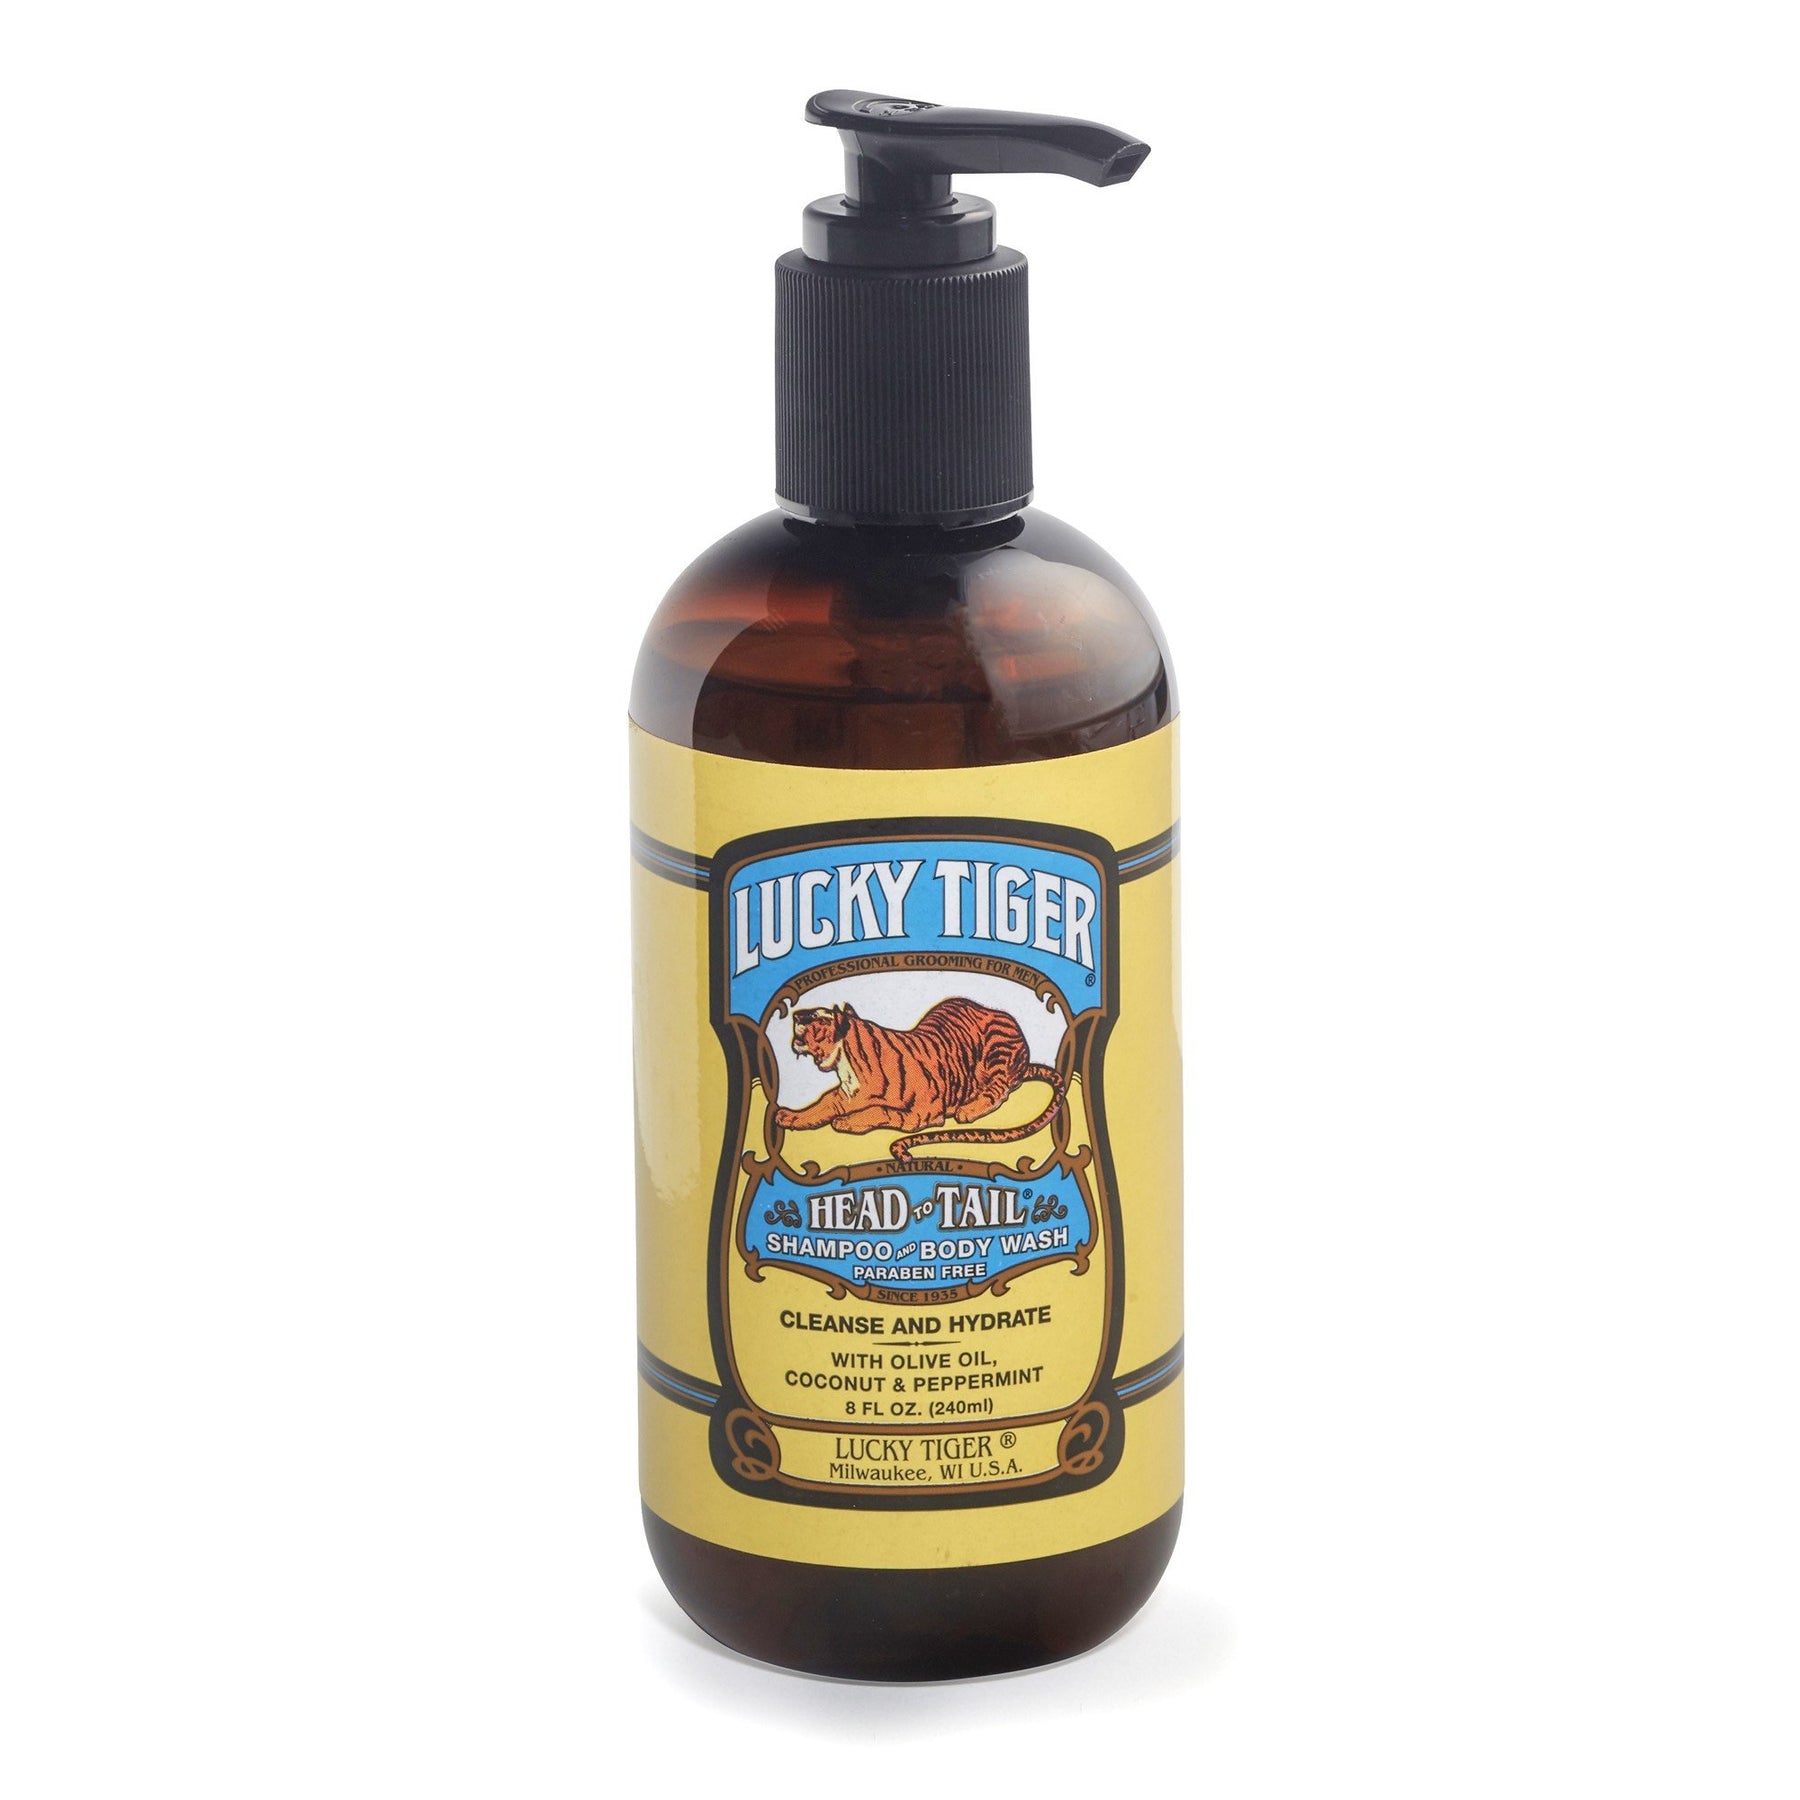 Lucky Tiger Head and Tail Shampoo and Body Wash , Shampoo and Body Wash, Lucky Tiger, Working Title